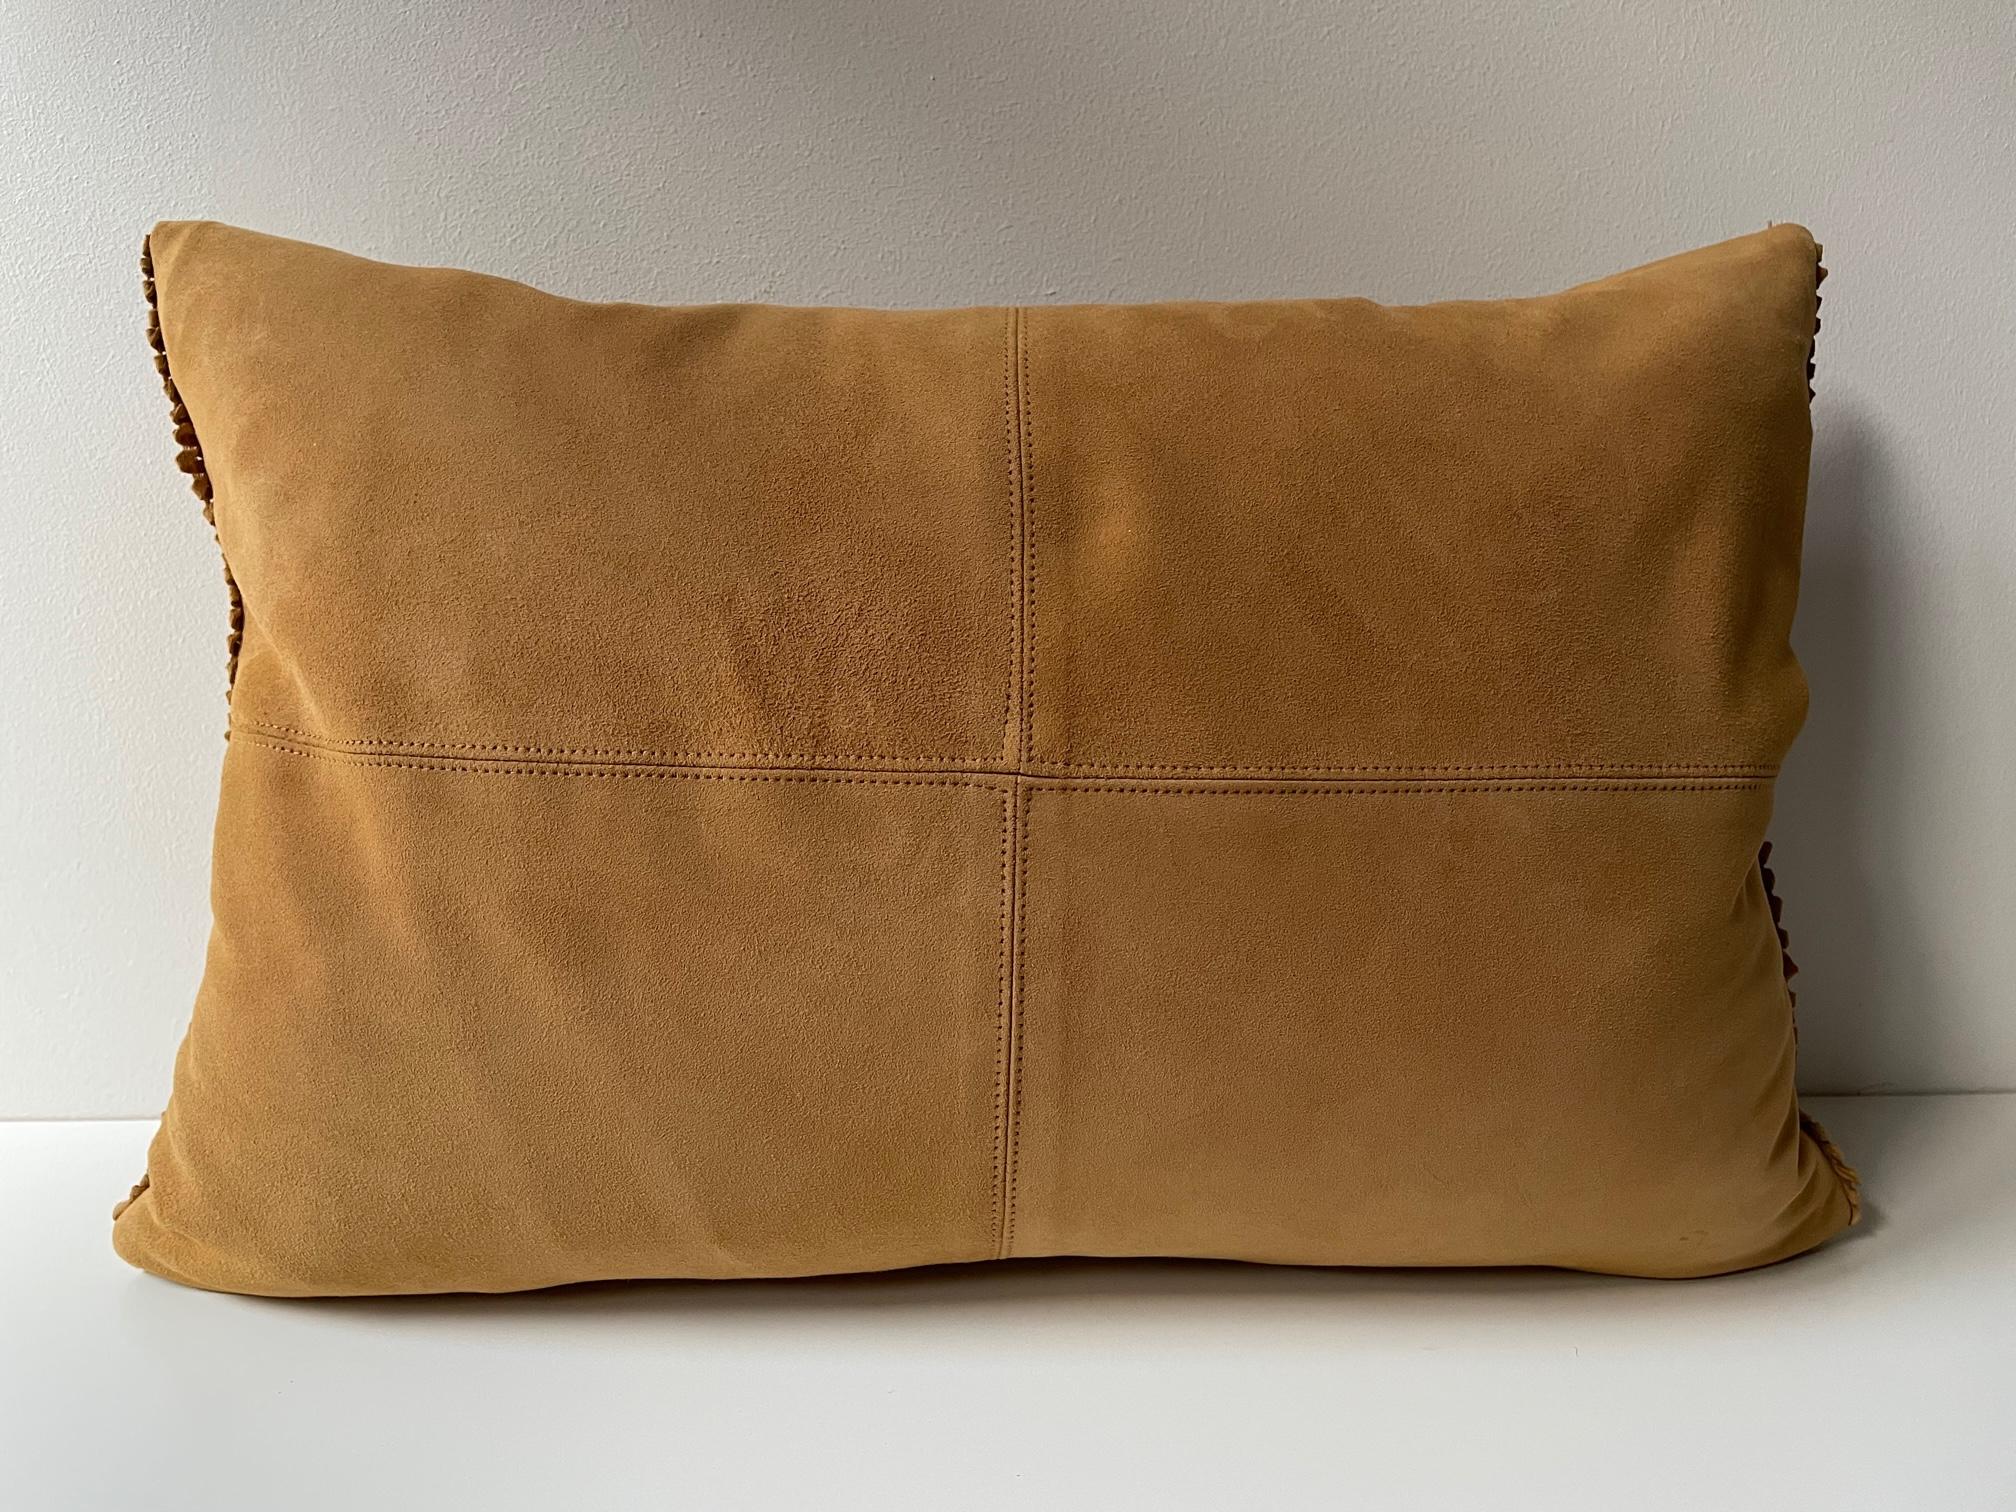 1 no Hand Woven Suede Cushion Colour Ginger, Back Side with Suede, Cushion size: 30 x 45 cm, silk lining, inner pad with new feathers.